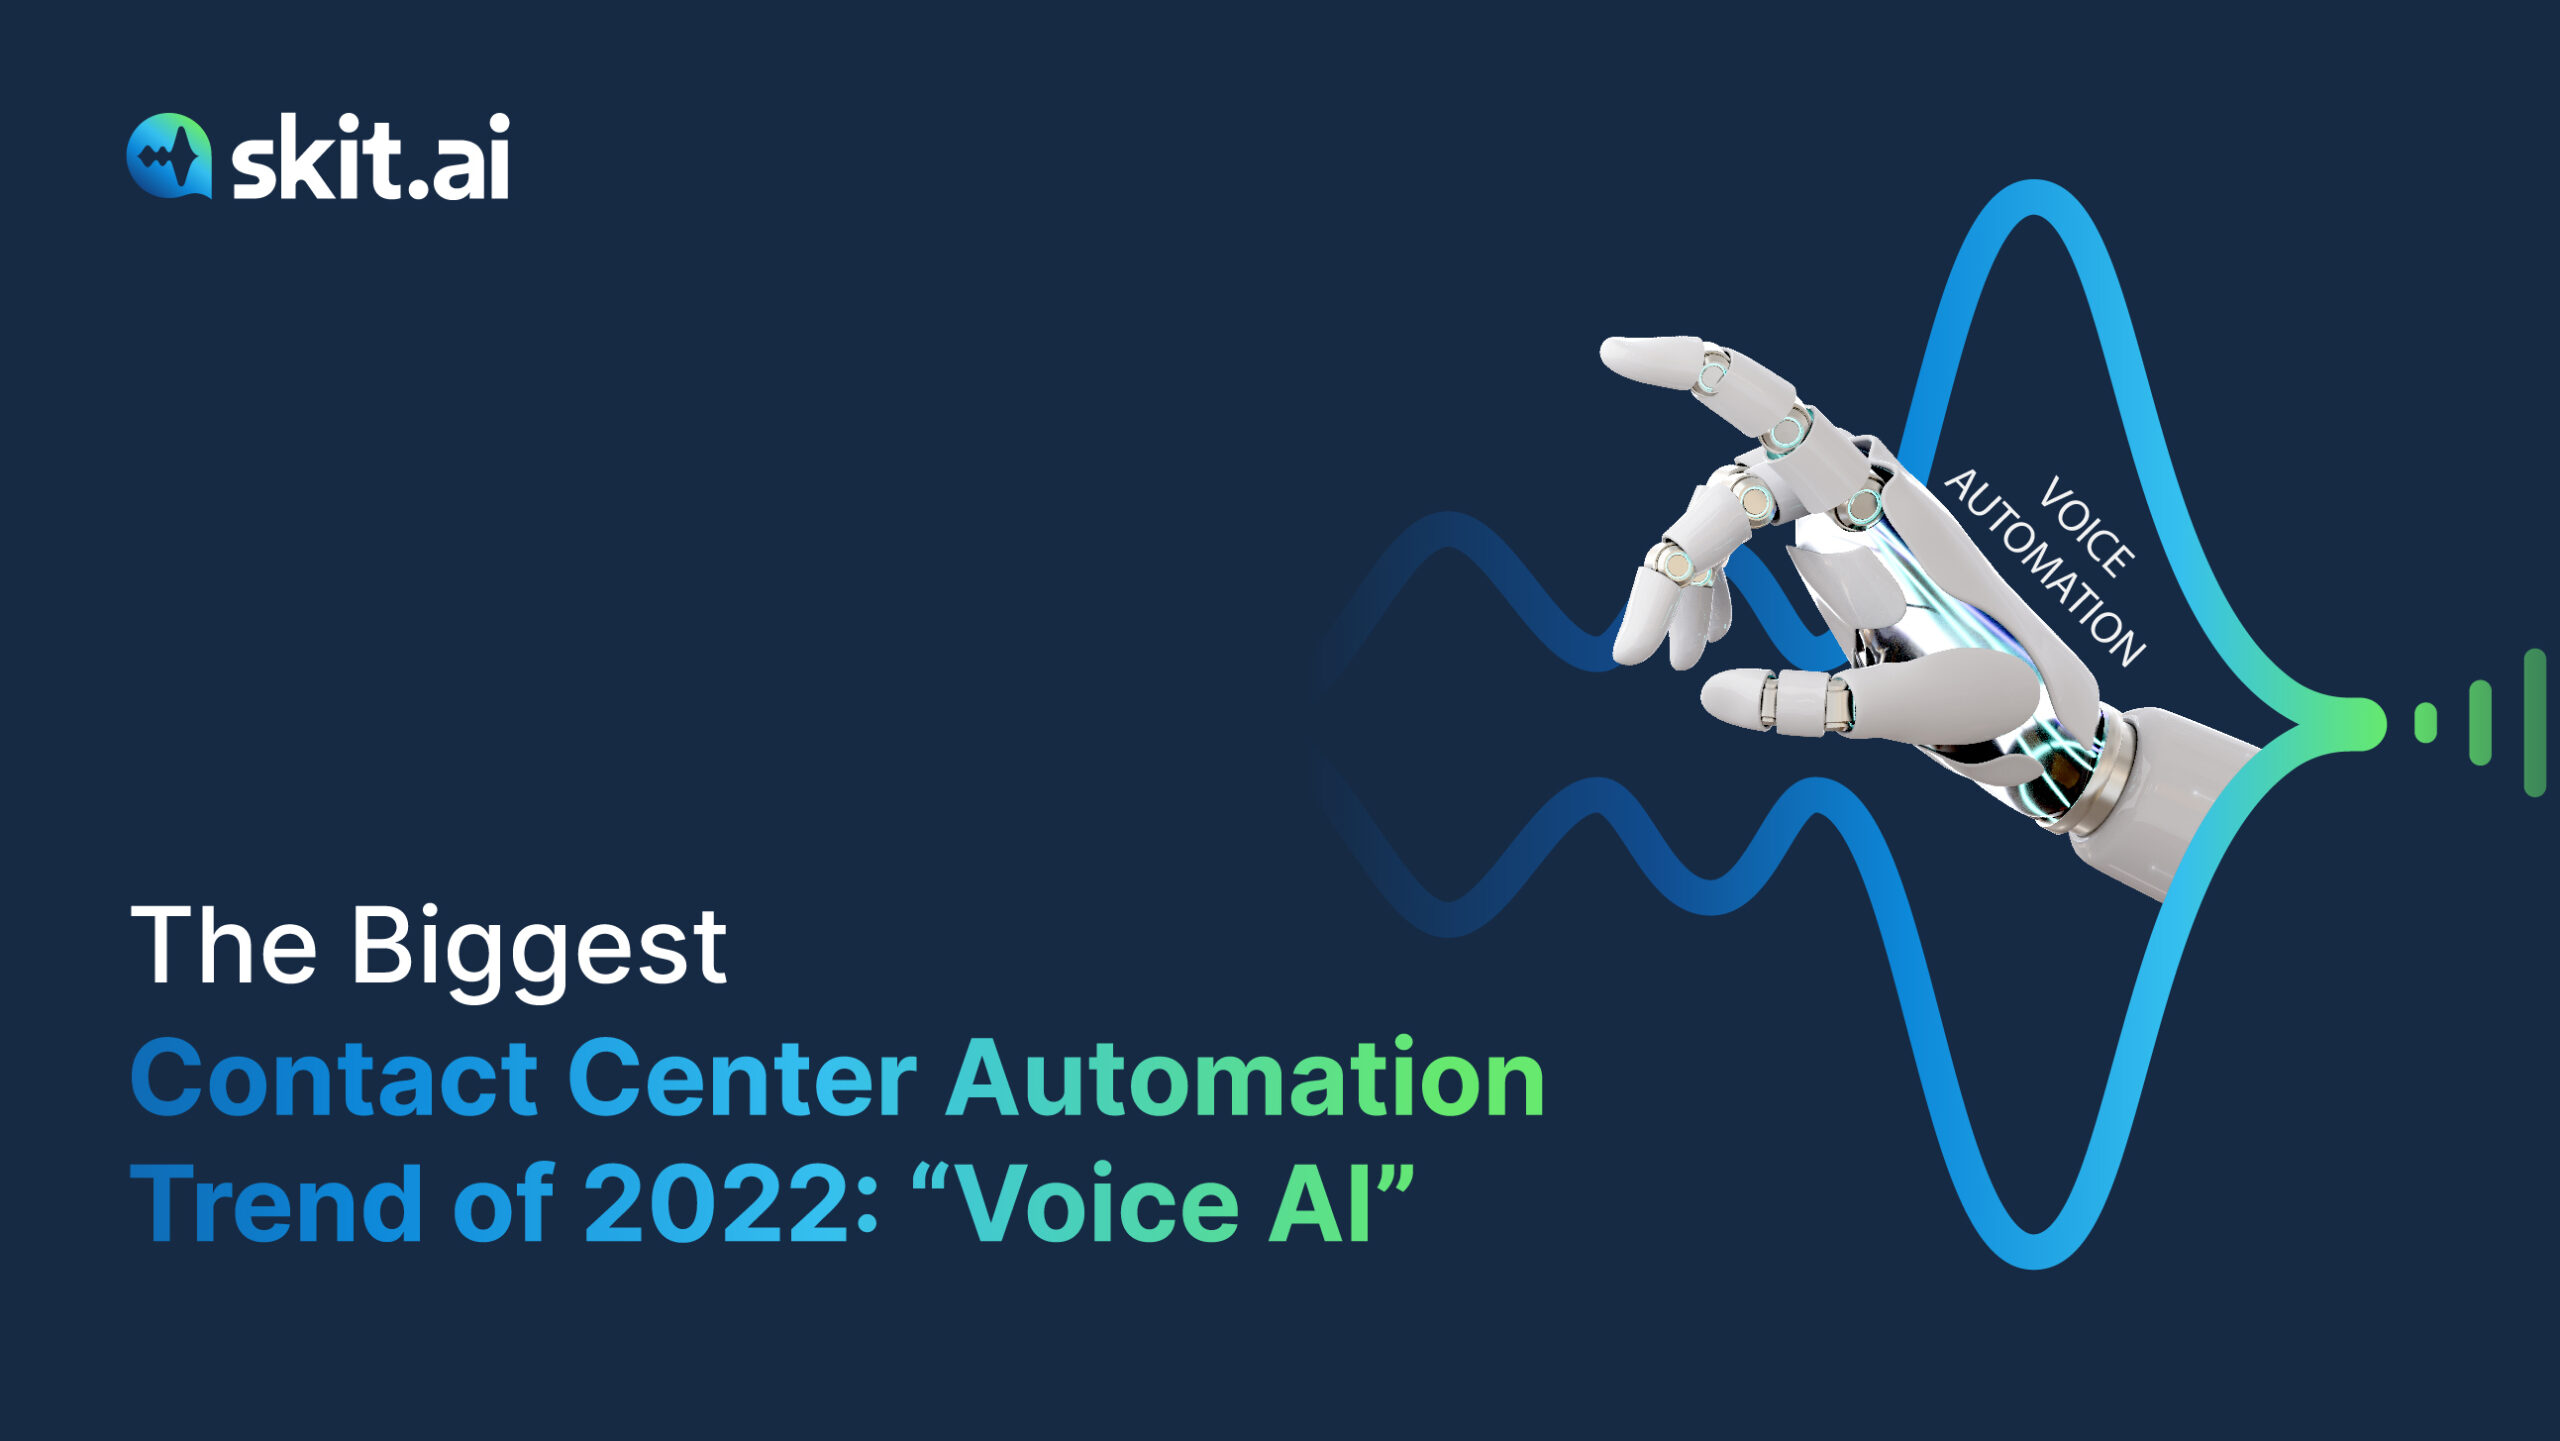 Voice AI: The Biggest Contact Center Automation Trend of 2022